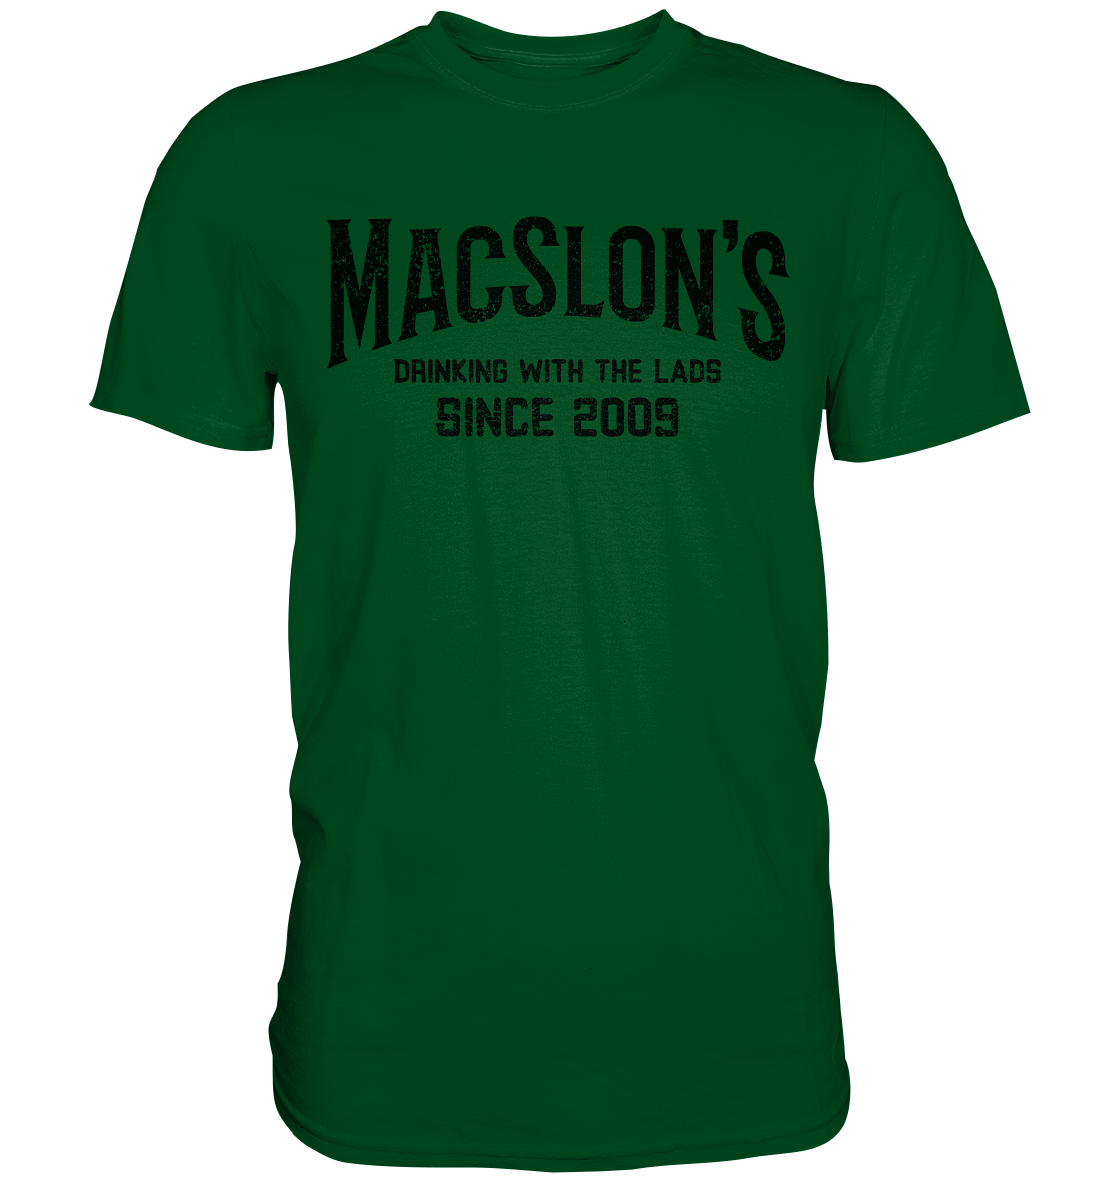 MacSlon's "Drinking With The Lads" - Premium Shirt